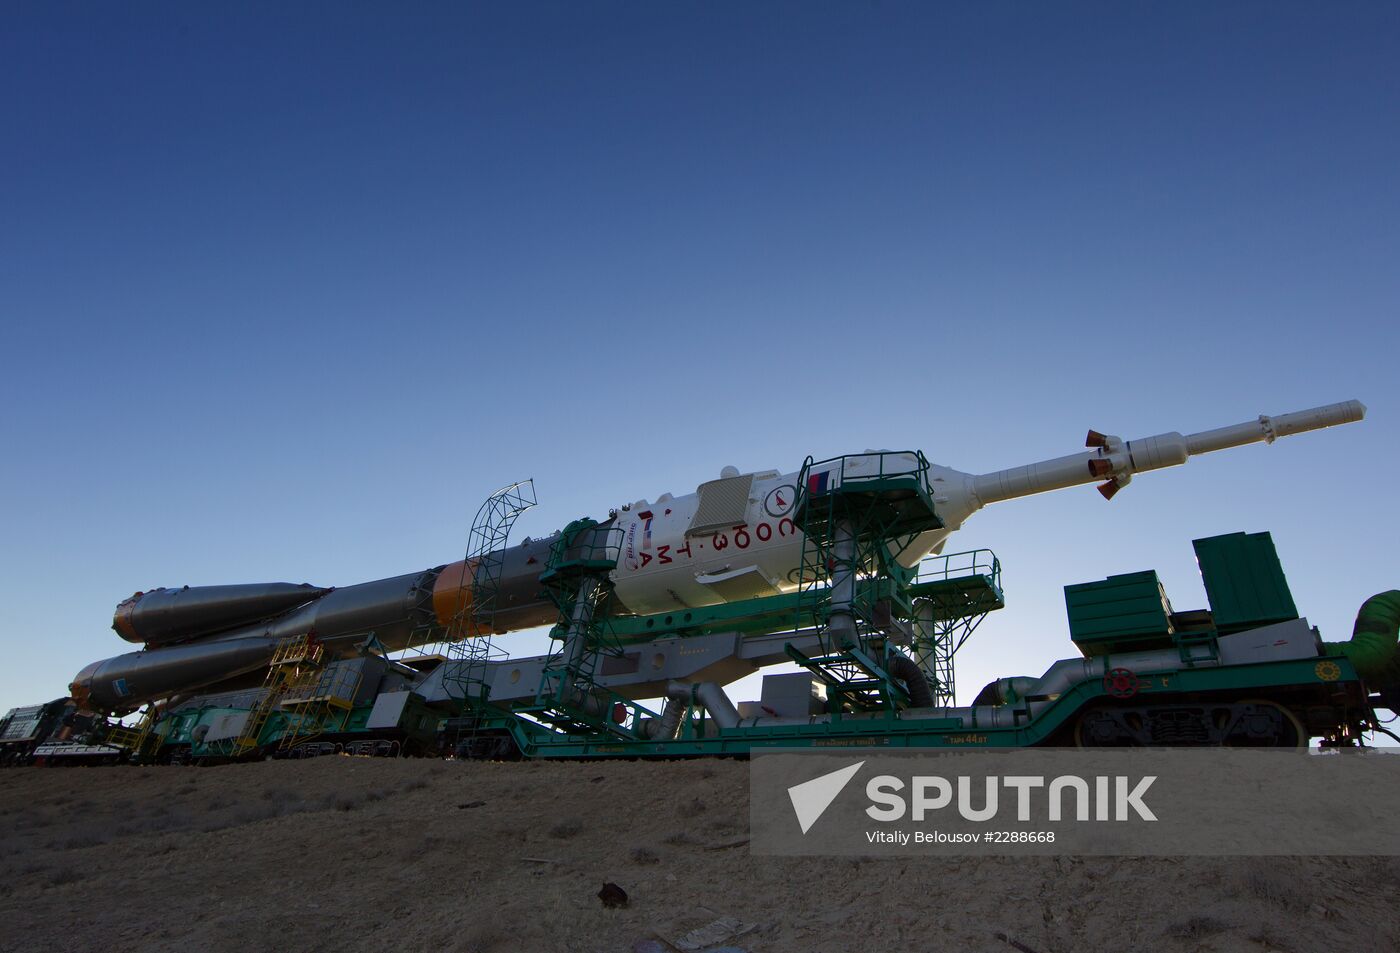 Soyuz FG rocket with Soyuz TMA-10M spacecraft rolled out to pad